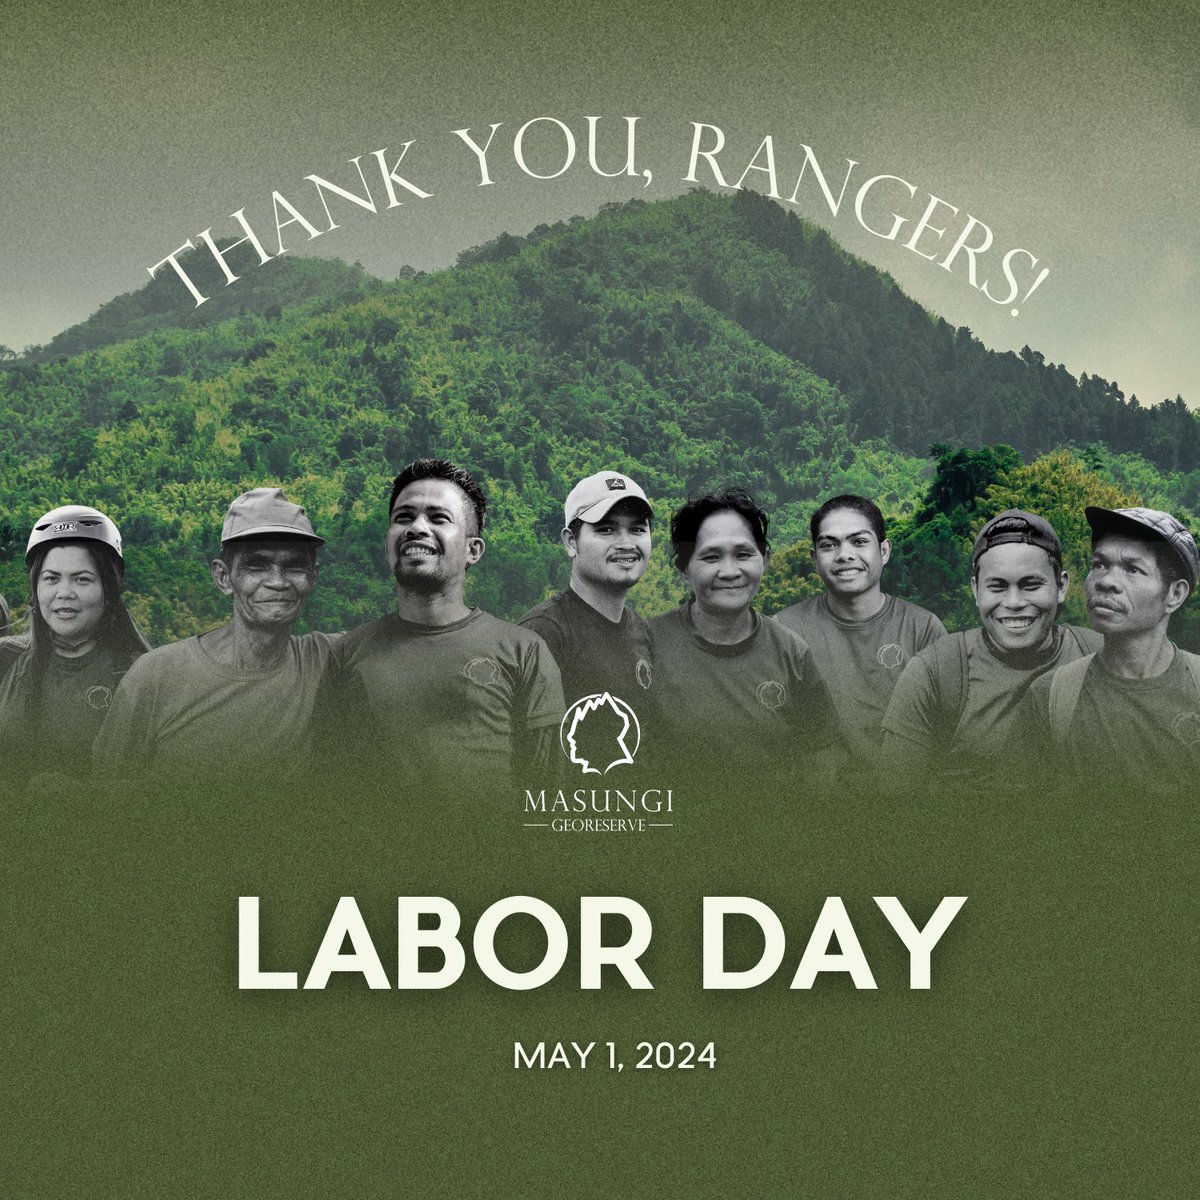 Today, let us honor to the real heroes of our environment — the park rangers who have shed blood, sweat, and tears for the preservation of our forests.🌳 Help them continue their impt work by signing a petition to sustain the Masungi Geopark Project: bit.ly/protectmasungi 🙏👣